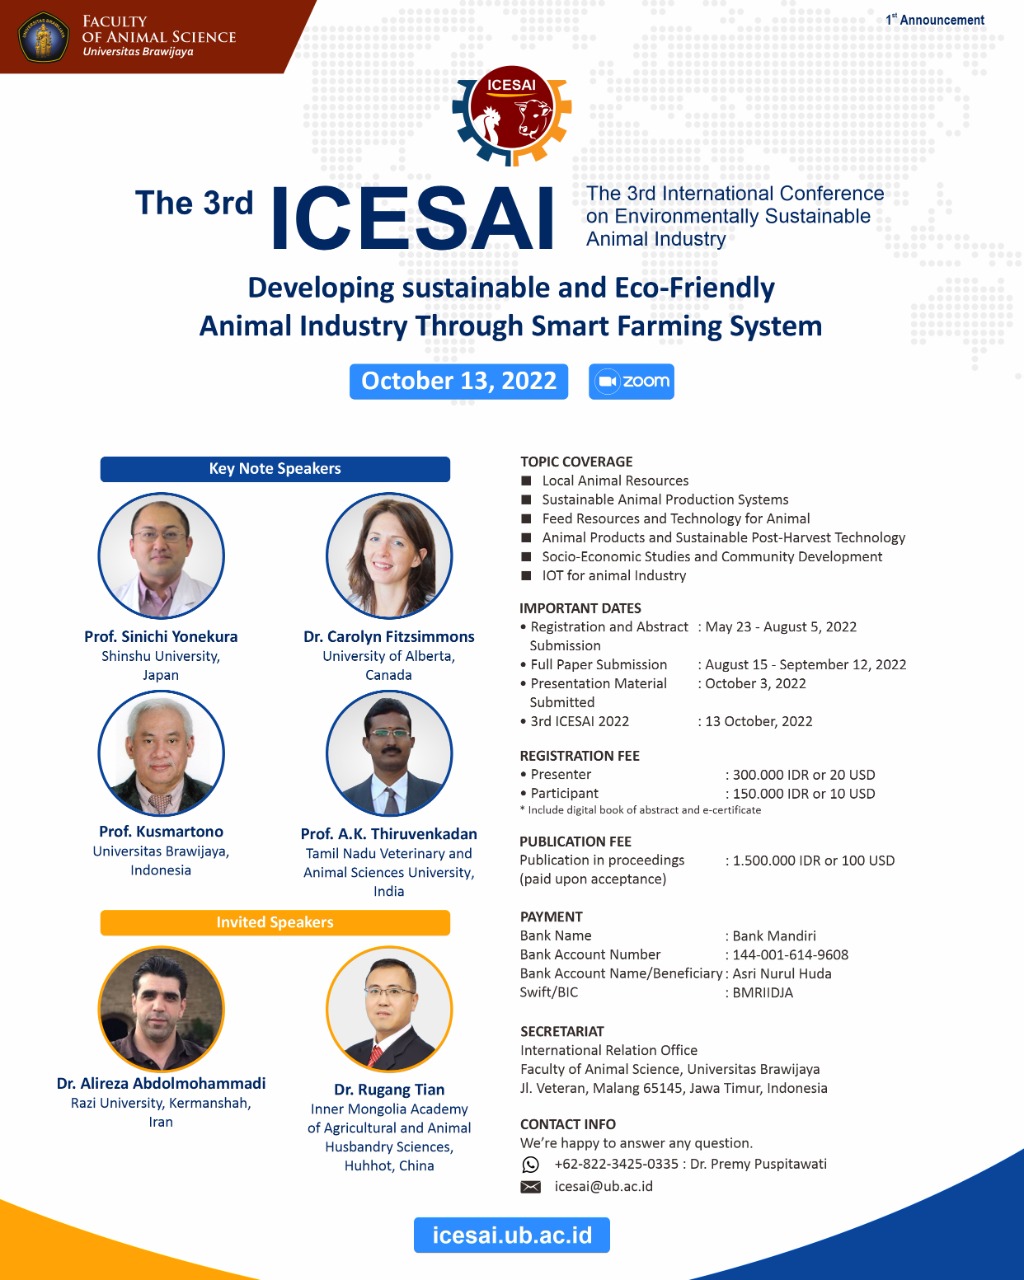 The 3rd International Conference on Environmentally Sustainable Animal Industry (ICESAI)